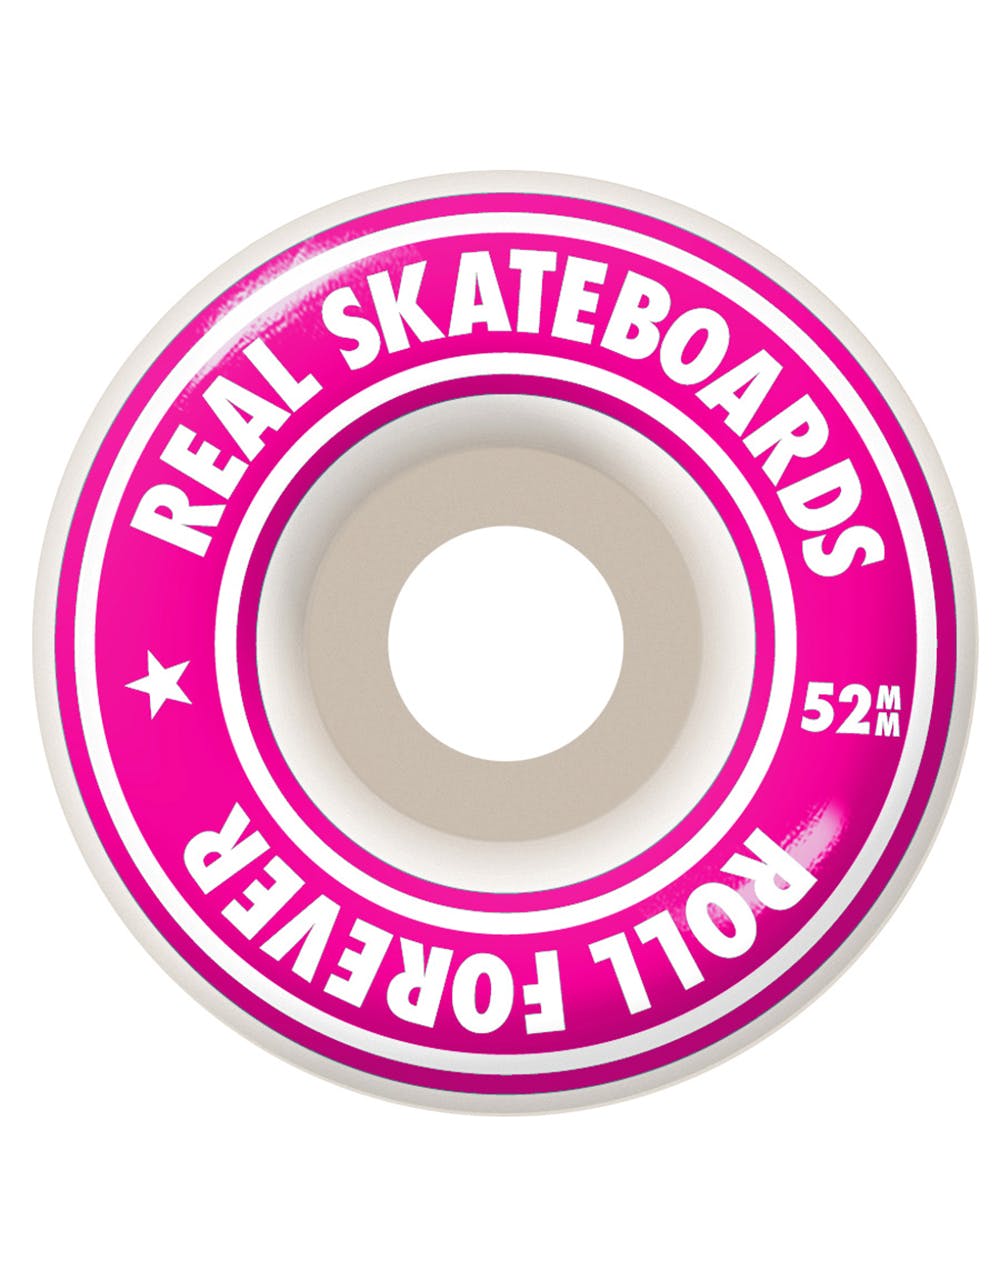 Real Awol Ovals Complete Skateboard - 7.5"